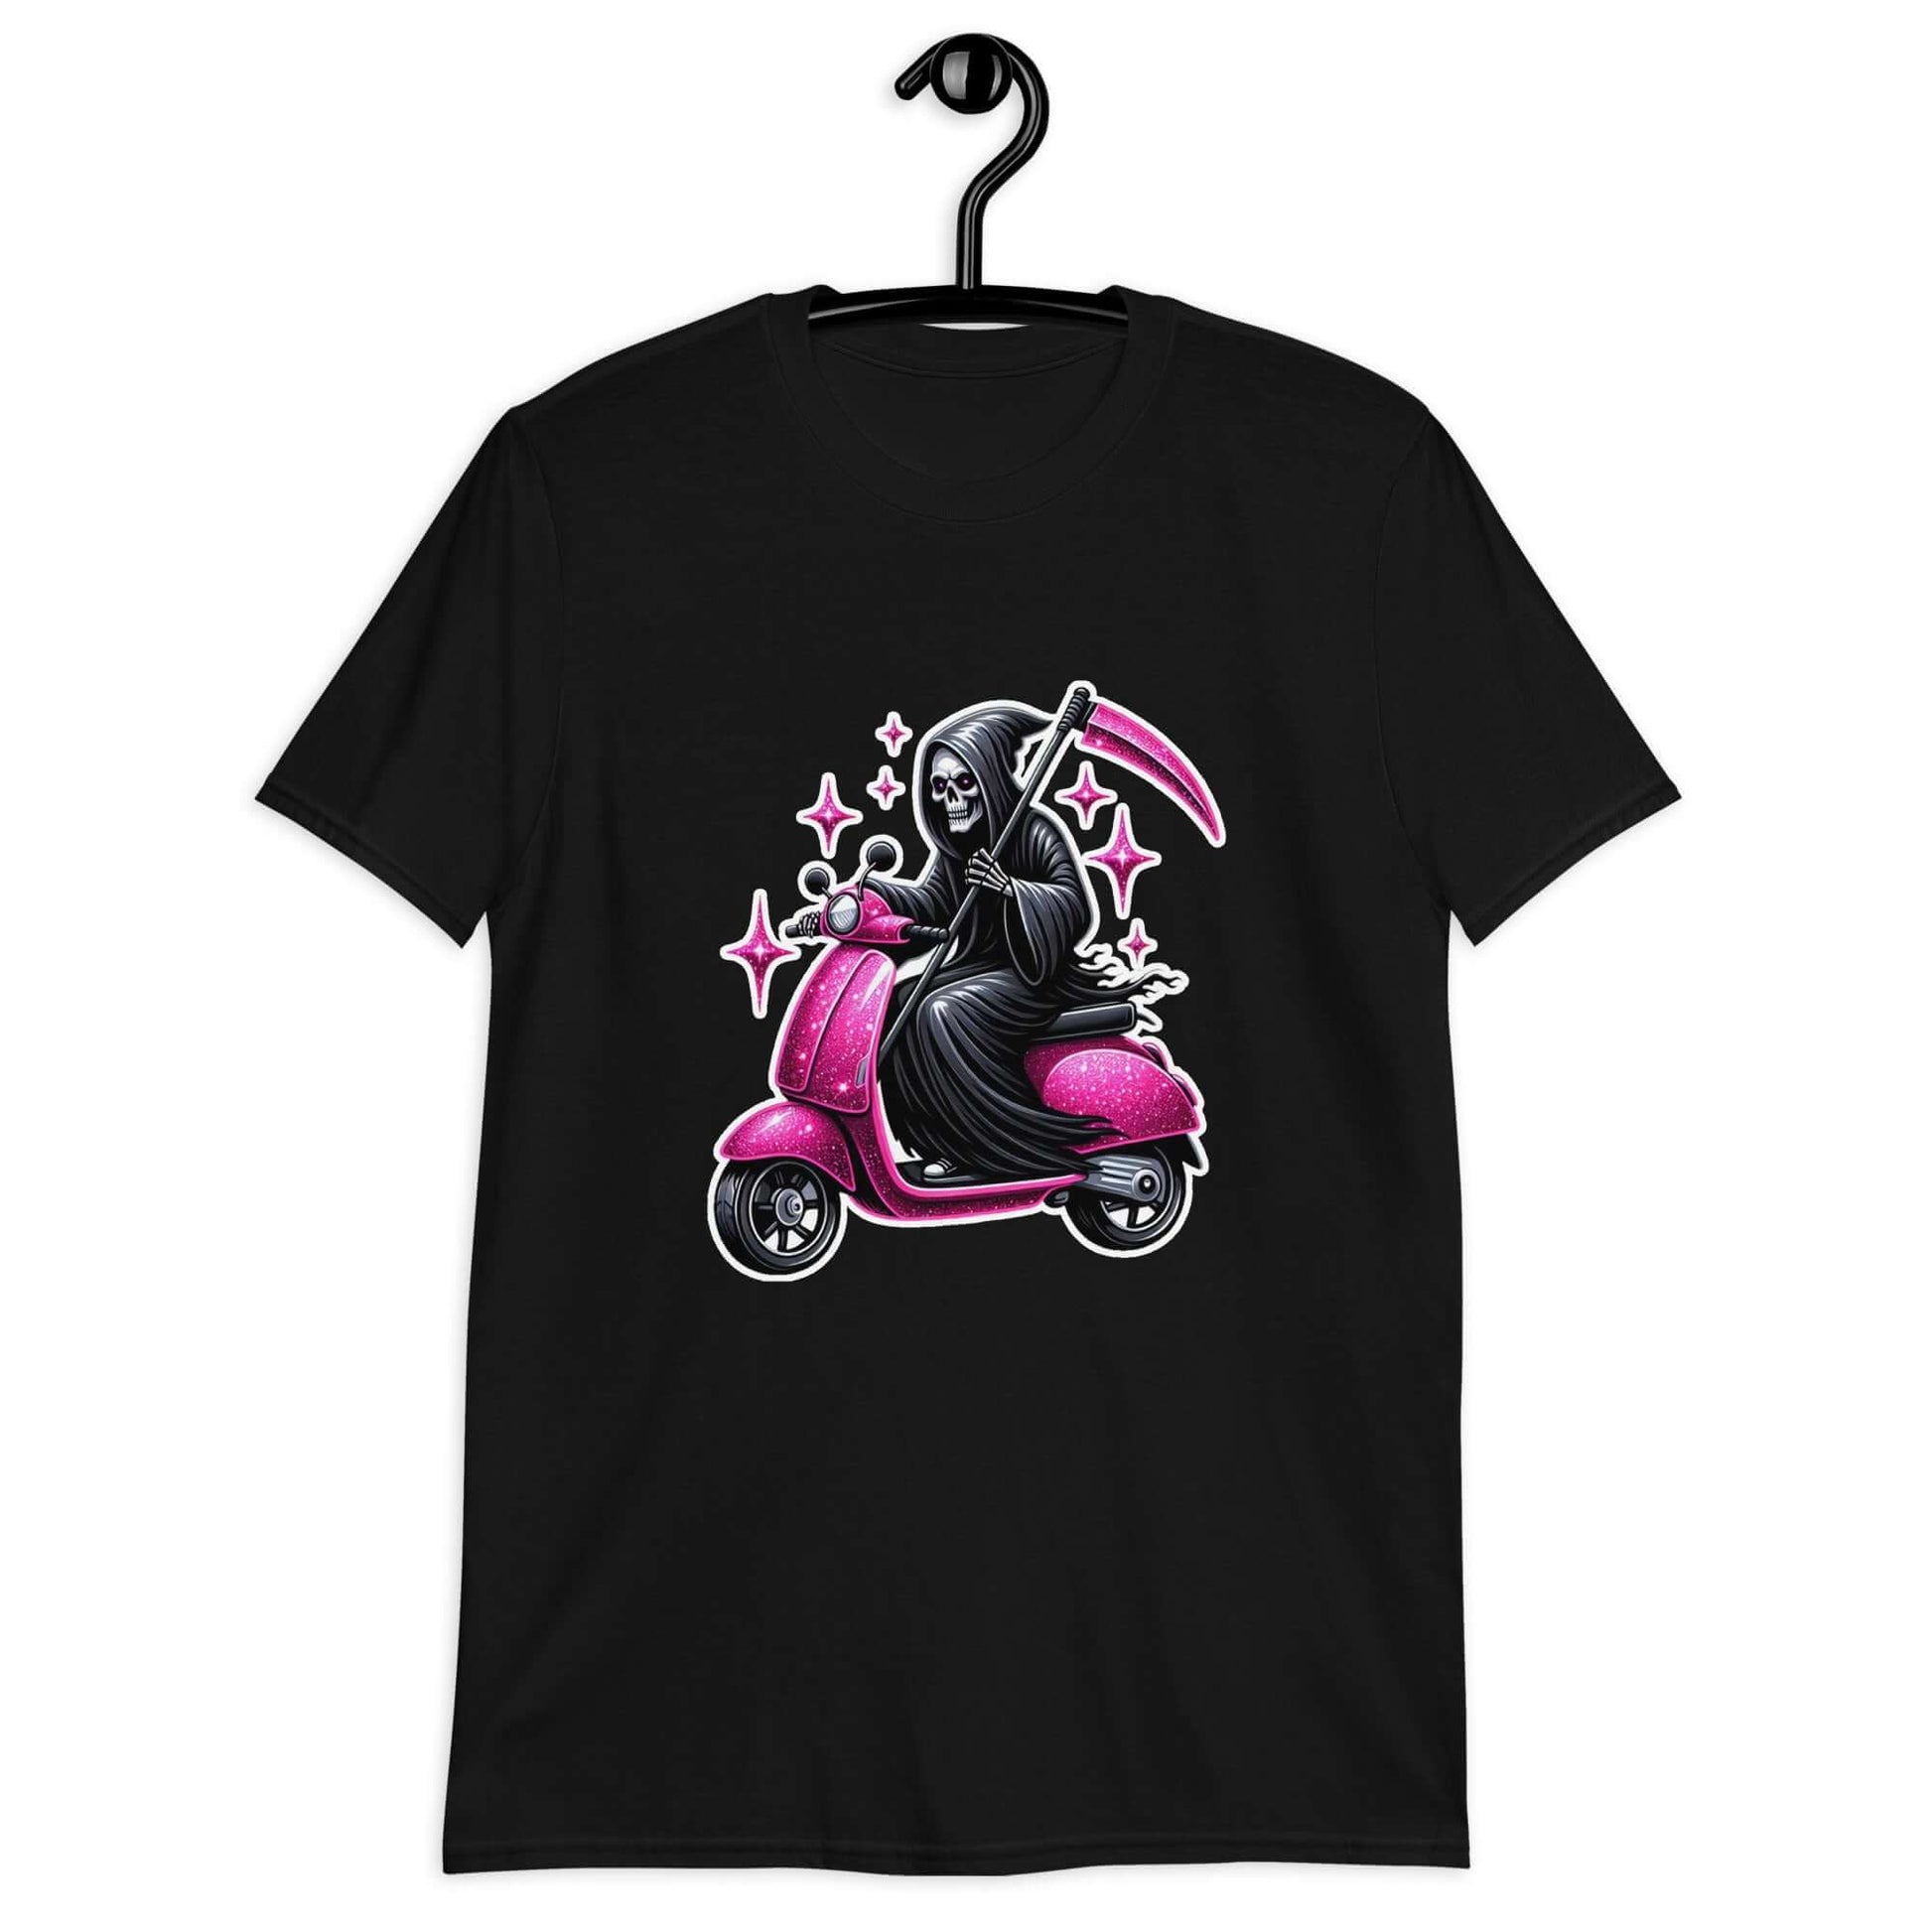 Black t-shirt with an image of the Grim Reaper riding on a glam pink scooter printed on the front.